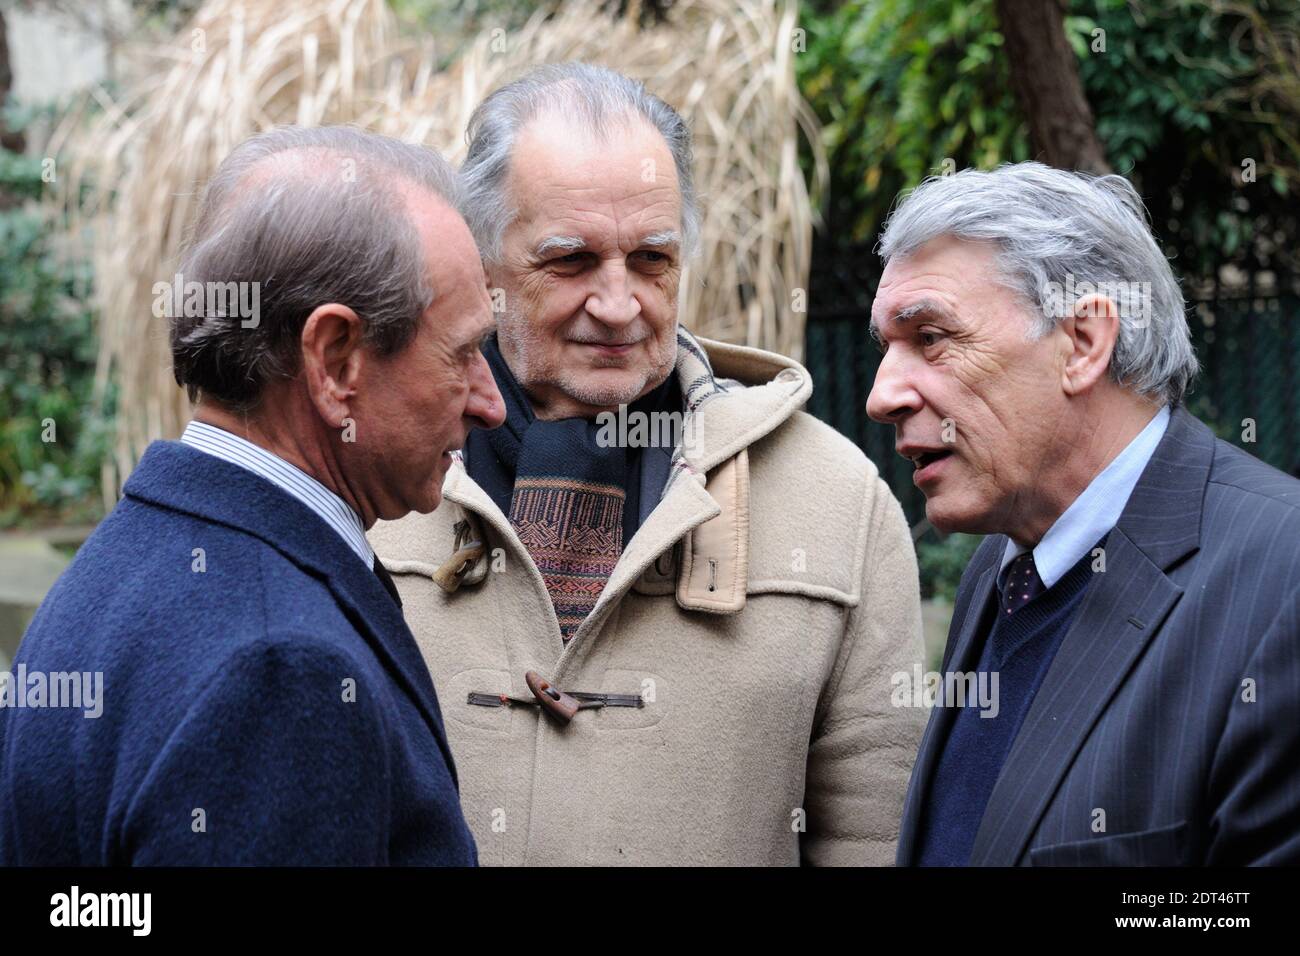 Paris mayor Bertrand Delanoe, Jean-Christophe Mitterrand and Gilbert  Mitterrand attending a tree planting ceremony to pay tribute to Danielle  Mitterrand, the late wife of France's president Francois Mitterrand, at  Square Danielle Mitterrand